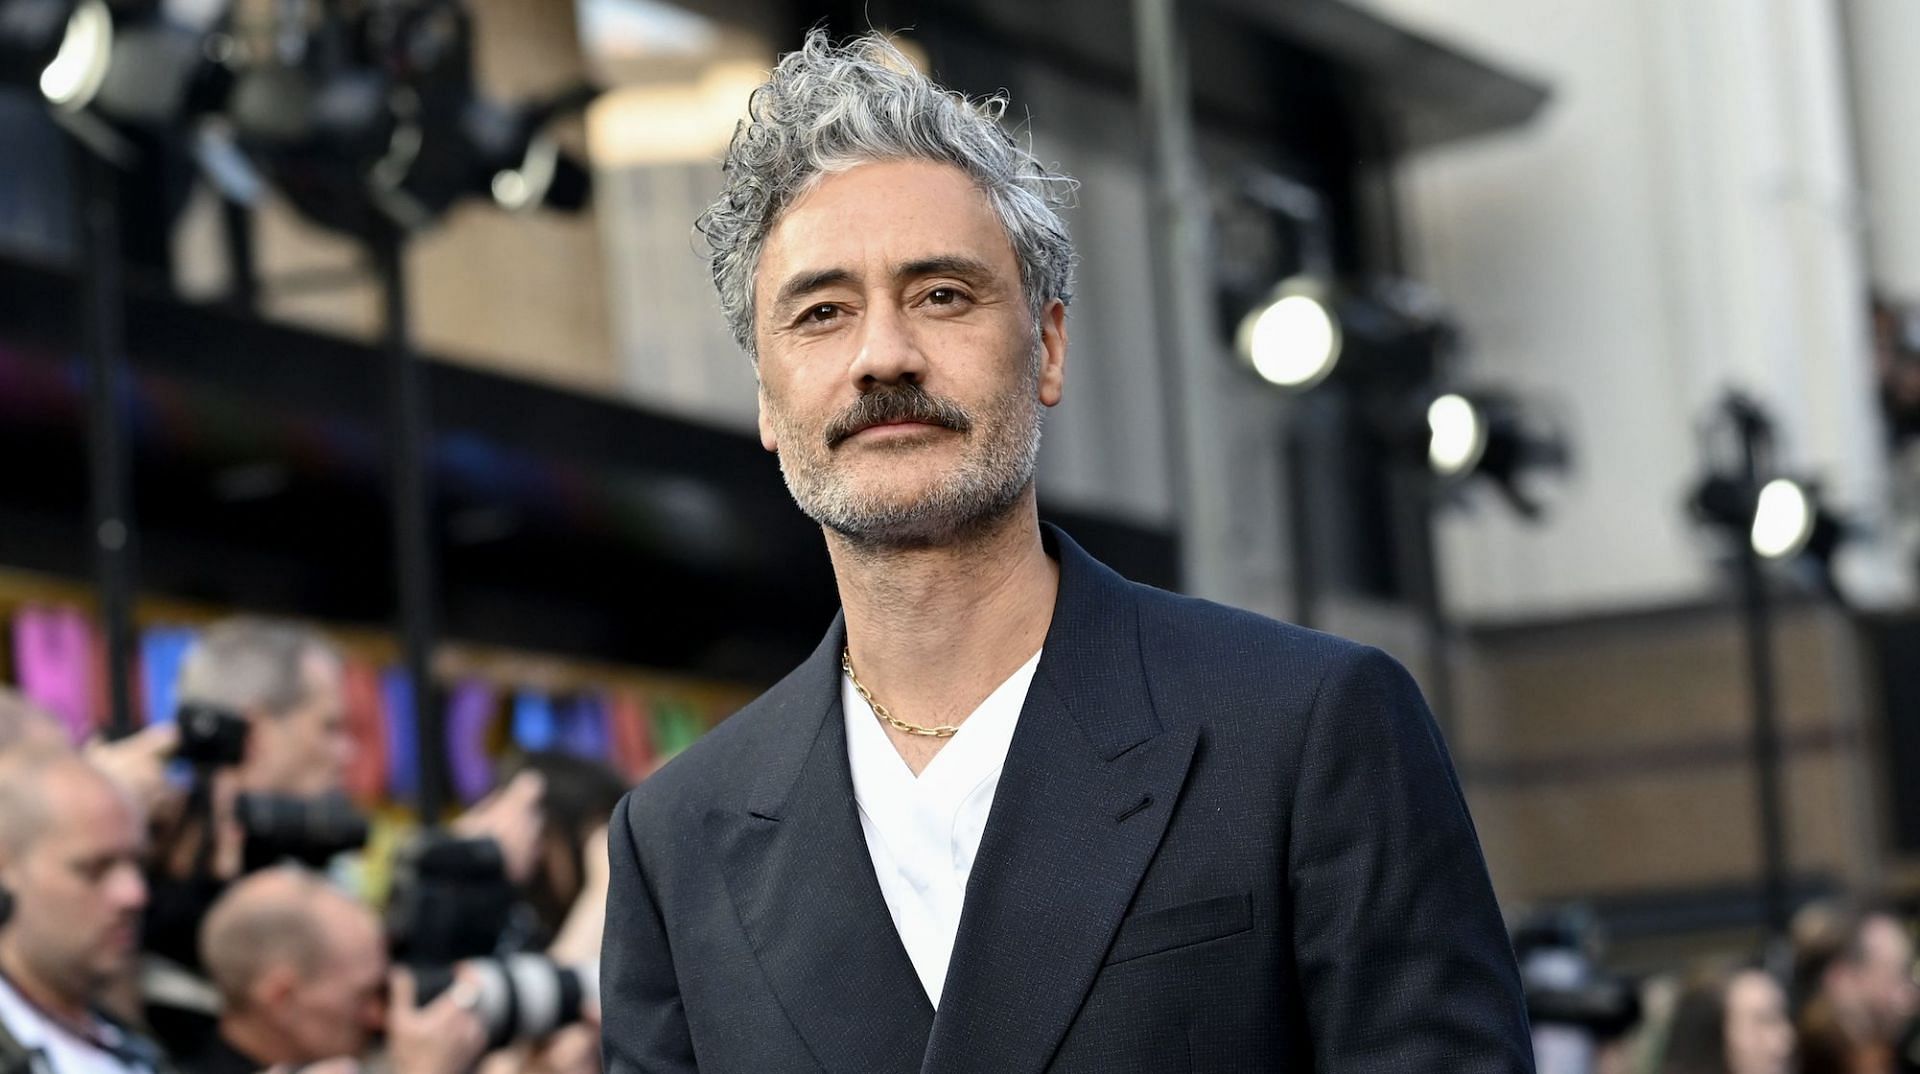 Mixed reactions among fans on Taika Waititi directing and acting in the next Star Wars film (Image via Getty)